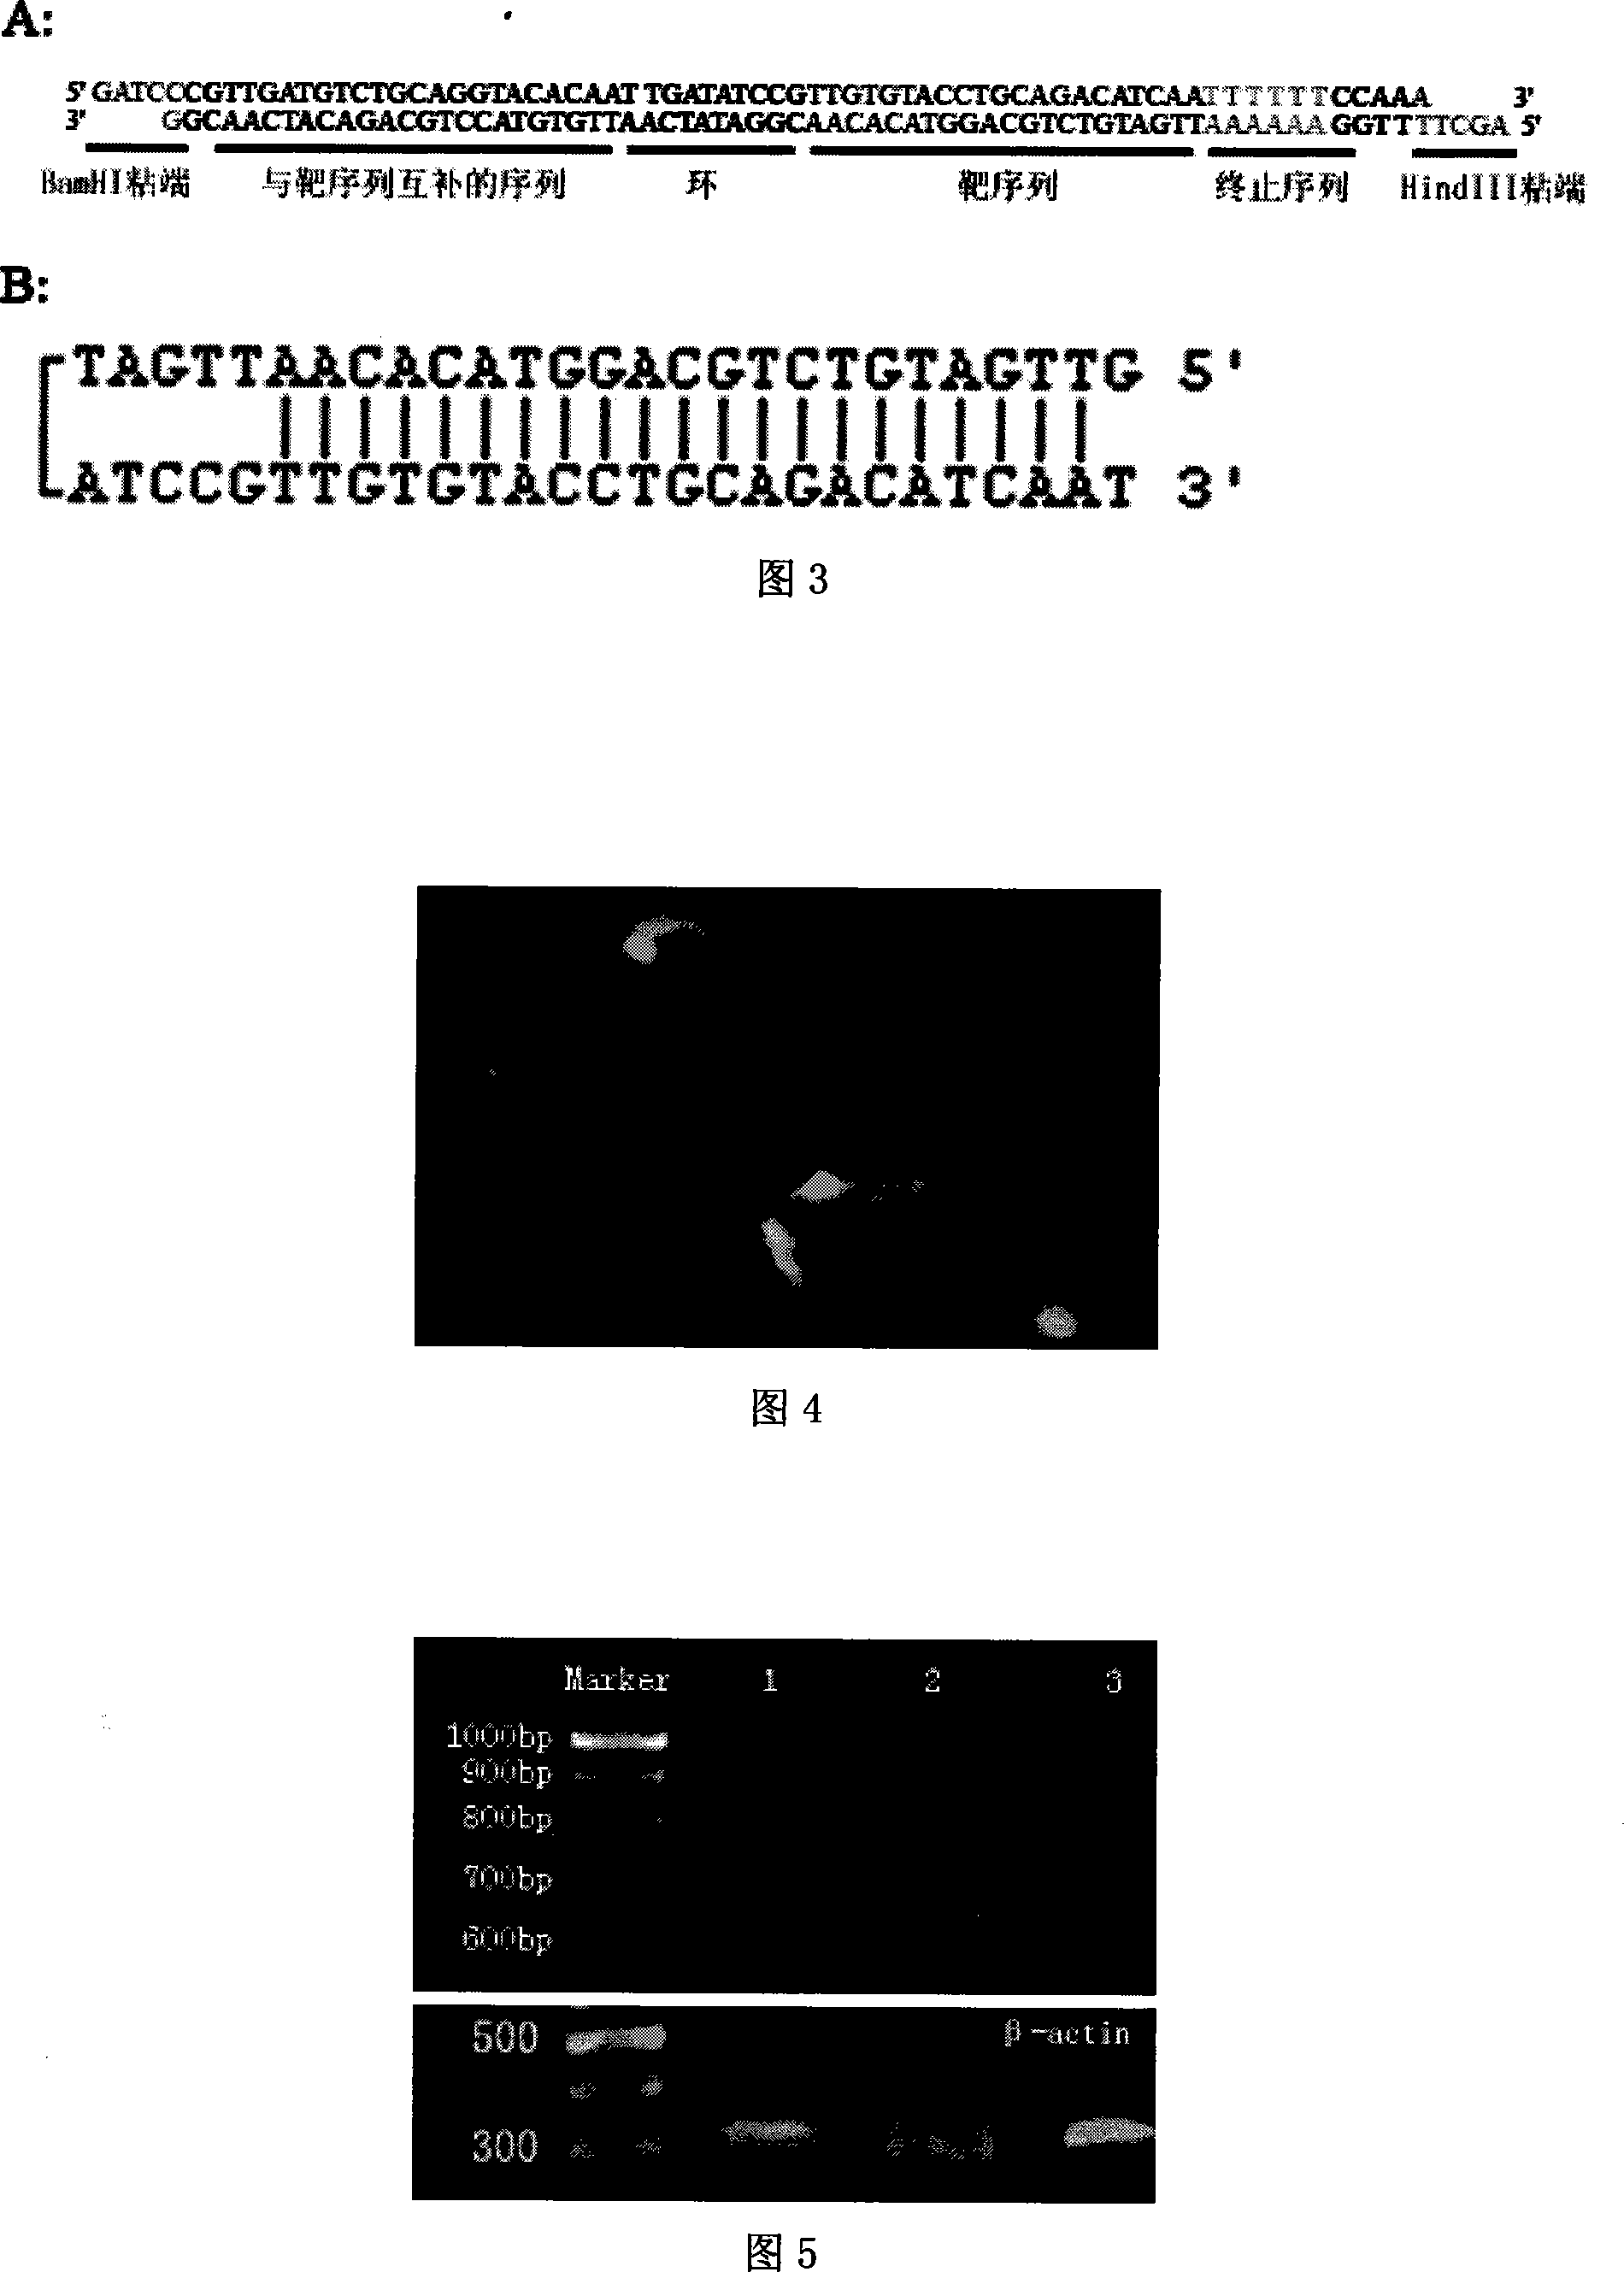 HBV core area resisting siRNA expression template and application